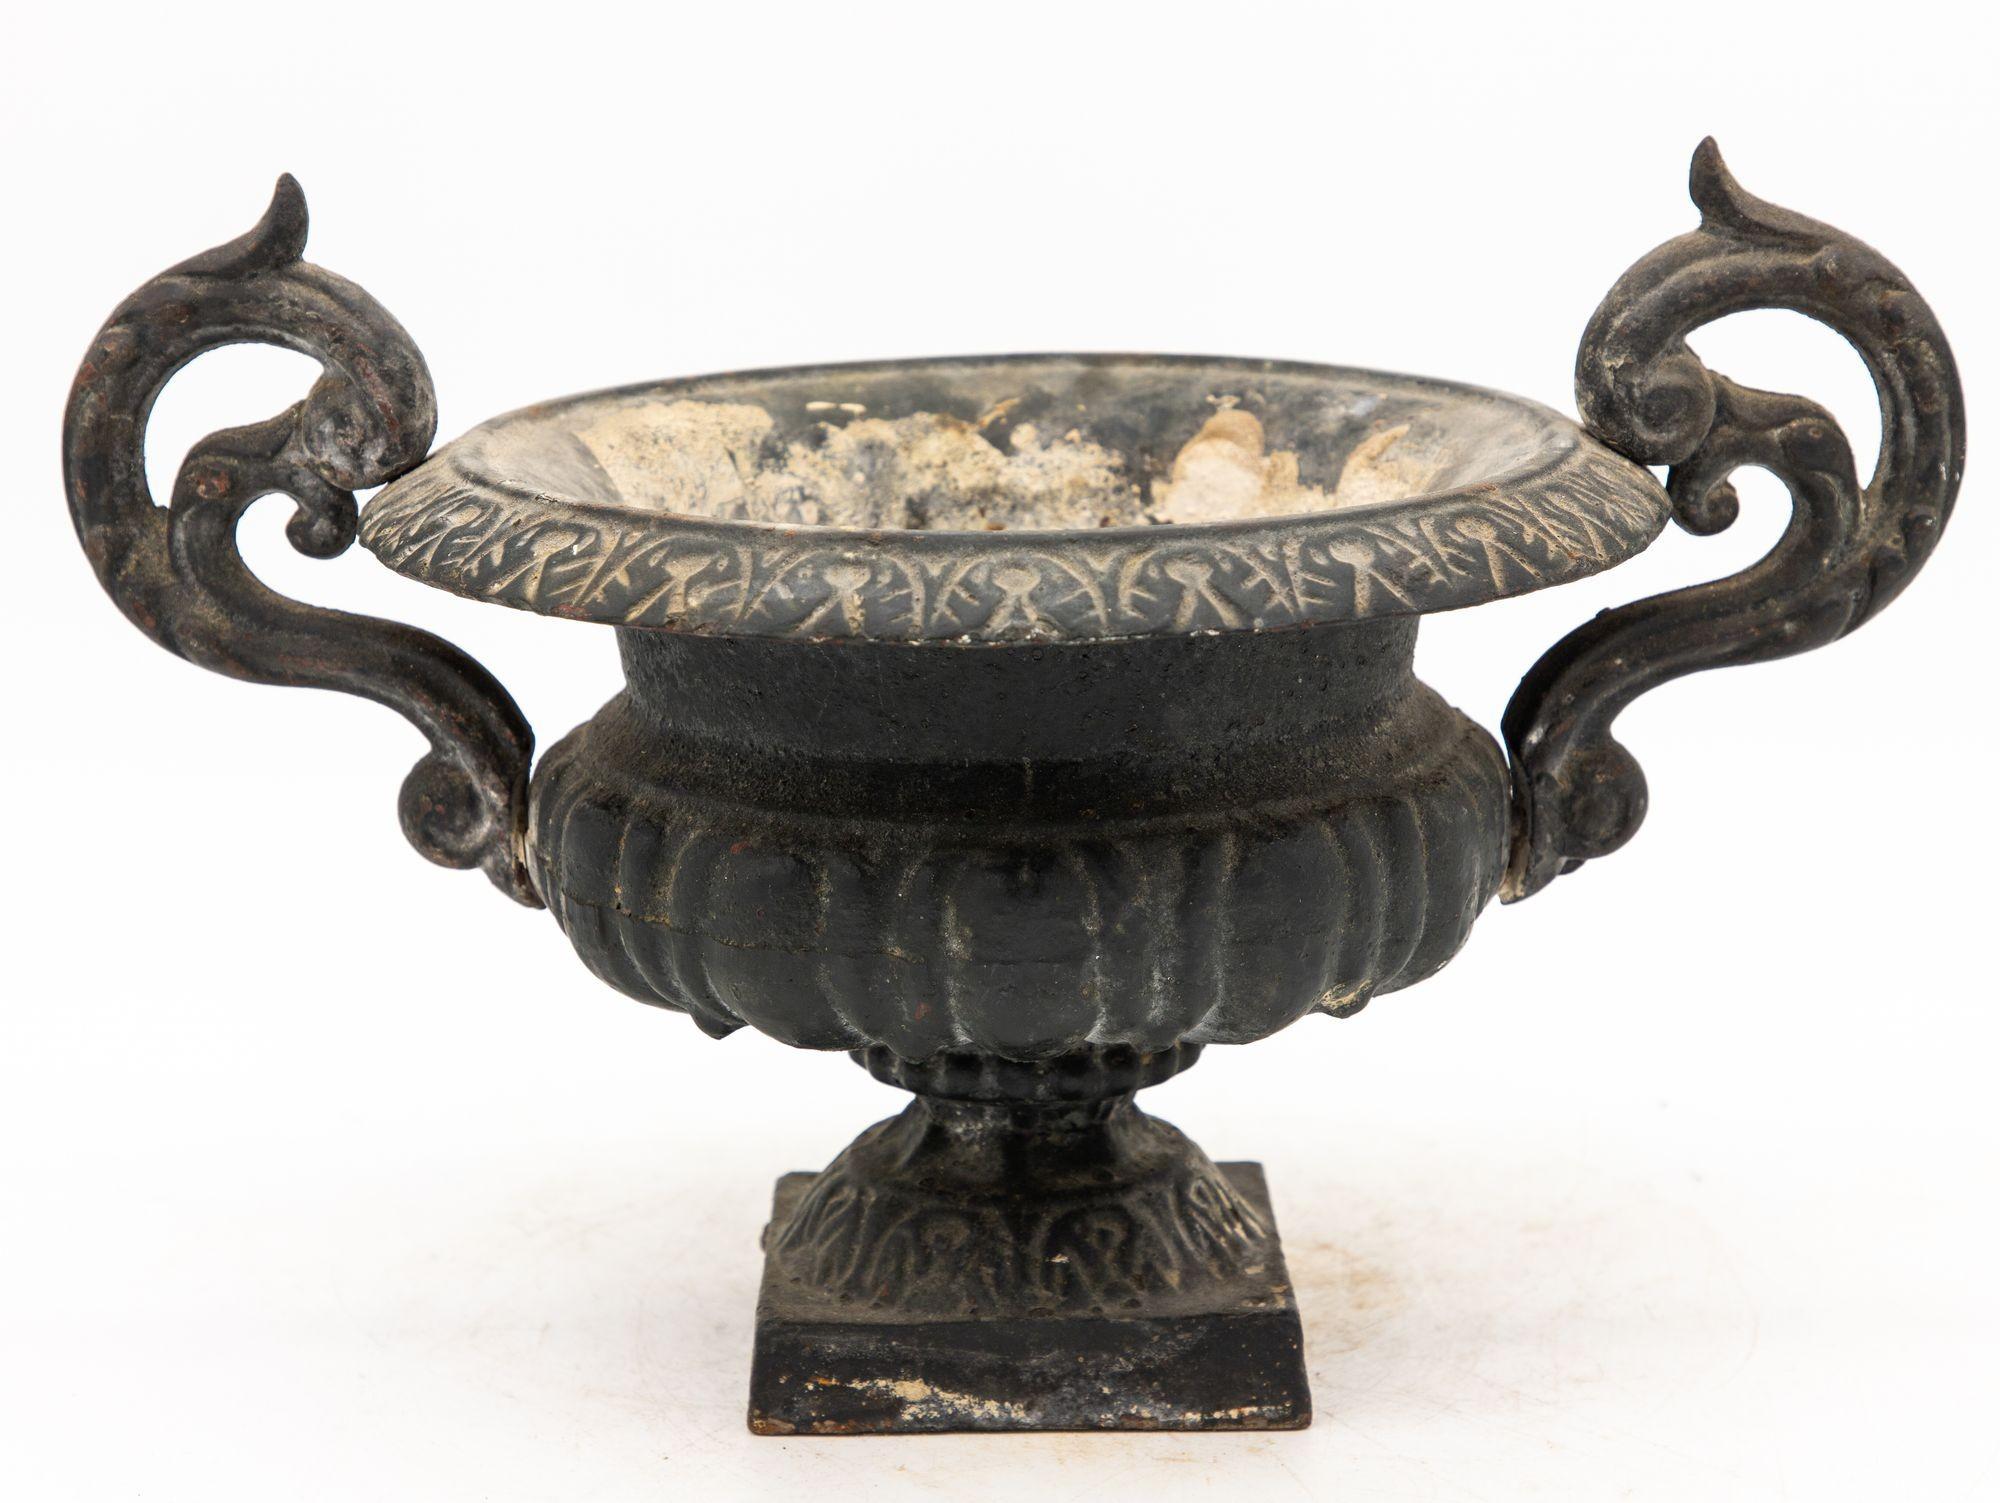 This black cast iron garden urn emerges as a timeless symbol of classical elegance. Its silhouette, neoclassical in style, is accentuated by a pair of acanthus handles, gracefully adorning the sides with intricate detailing. Atop the urn, lamb's